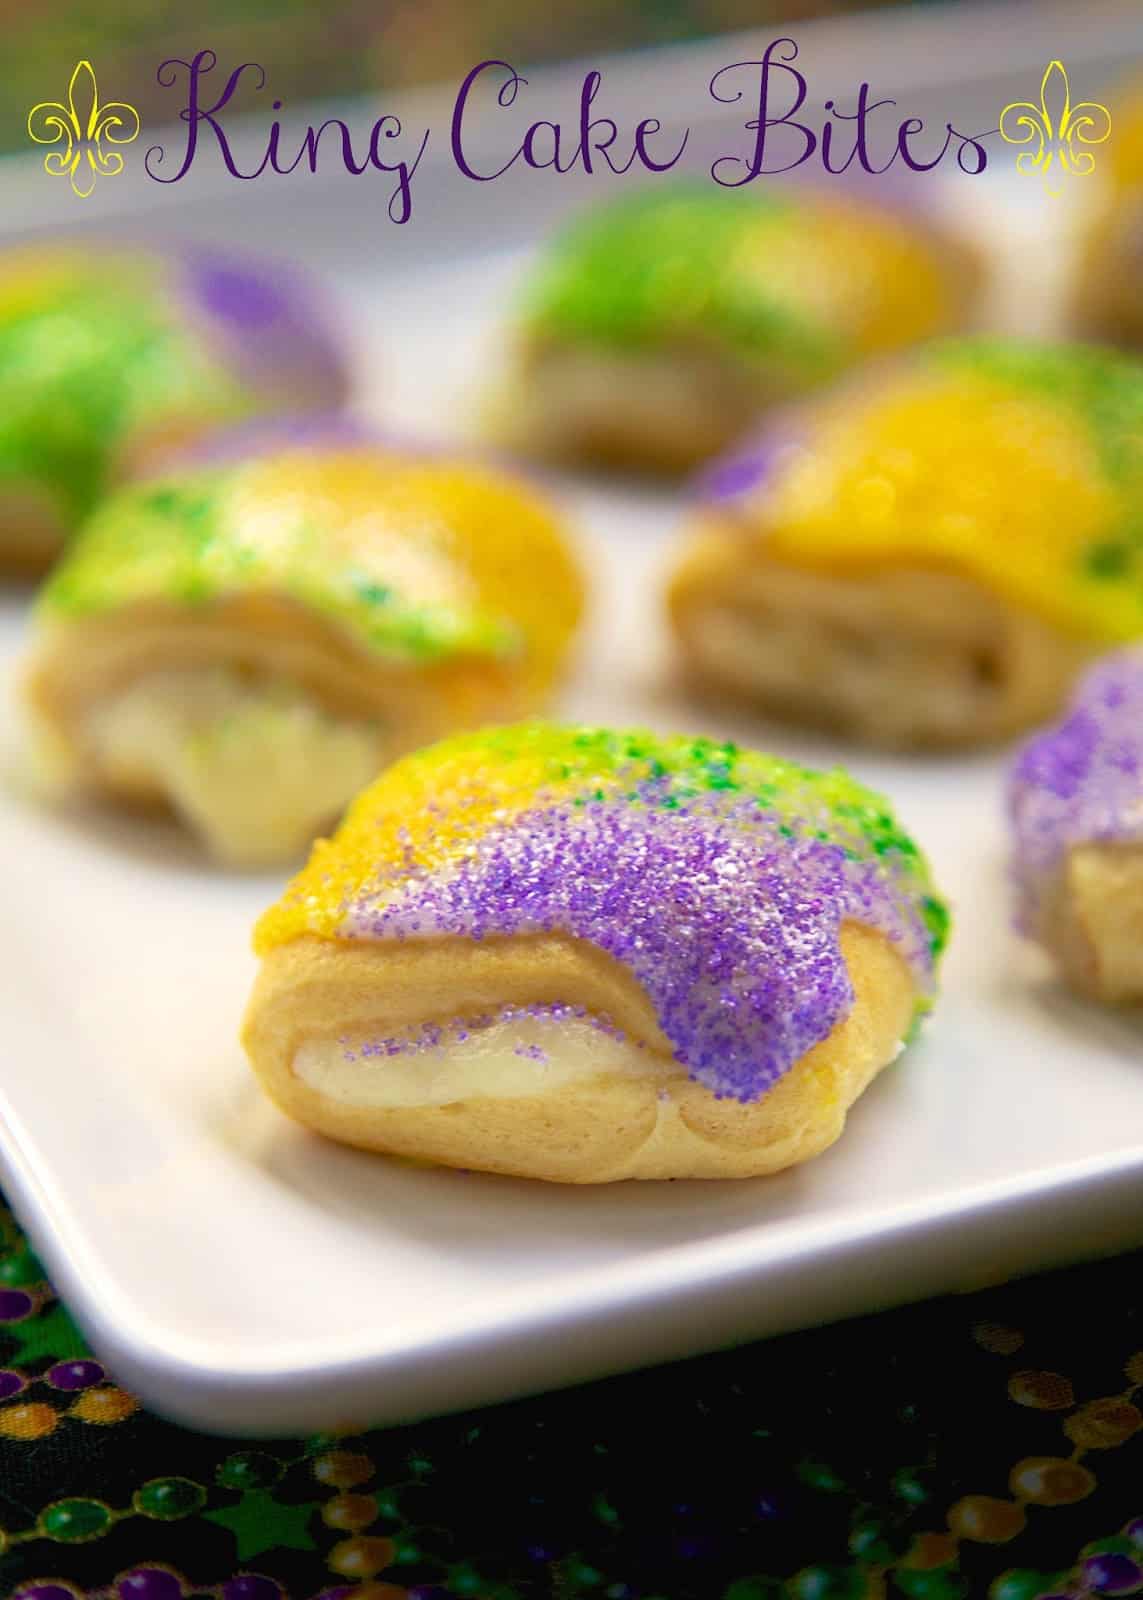 Easy King Cake Bites - present rolls filled with cinnamon and cream cheese, topped with icing and colored sugar - DELICIOUS! Great for breakfast or dessert! 